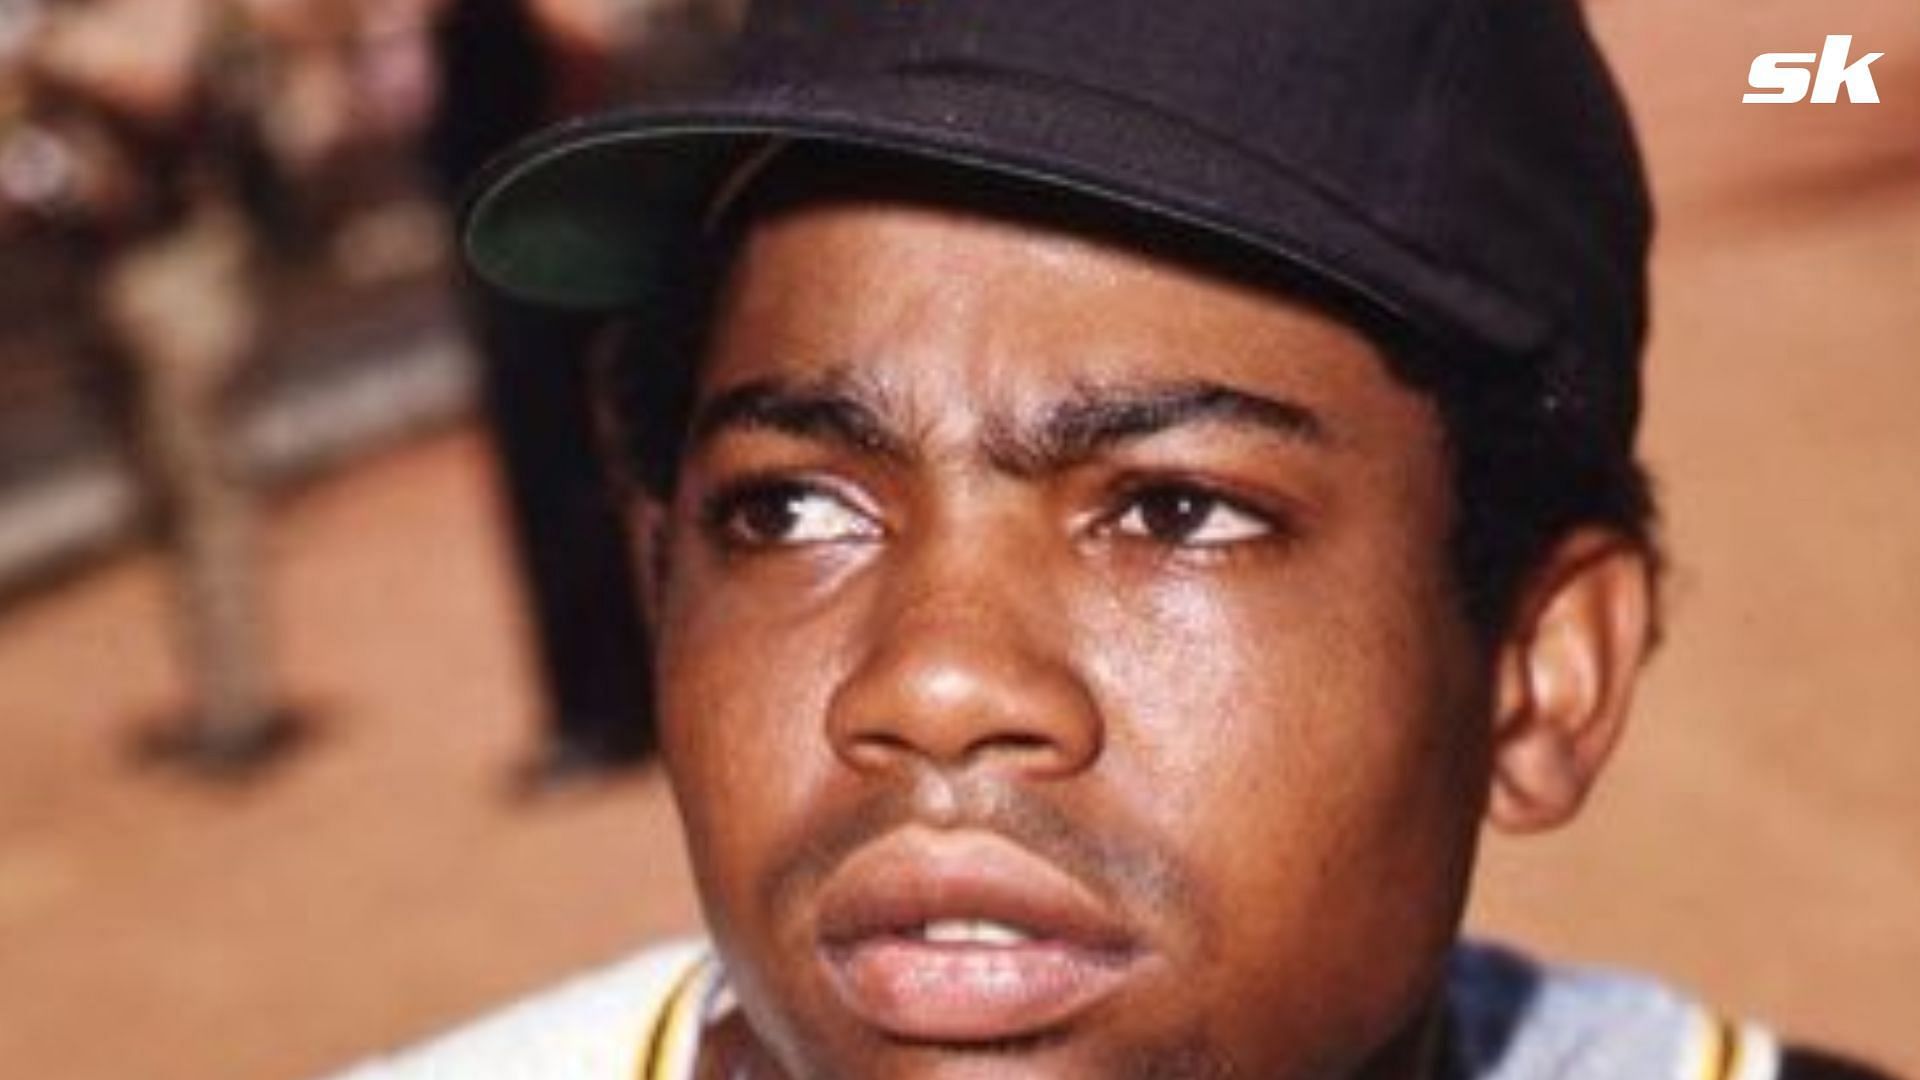 The Life And Career Of Dock Ellis (Story)